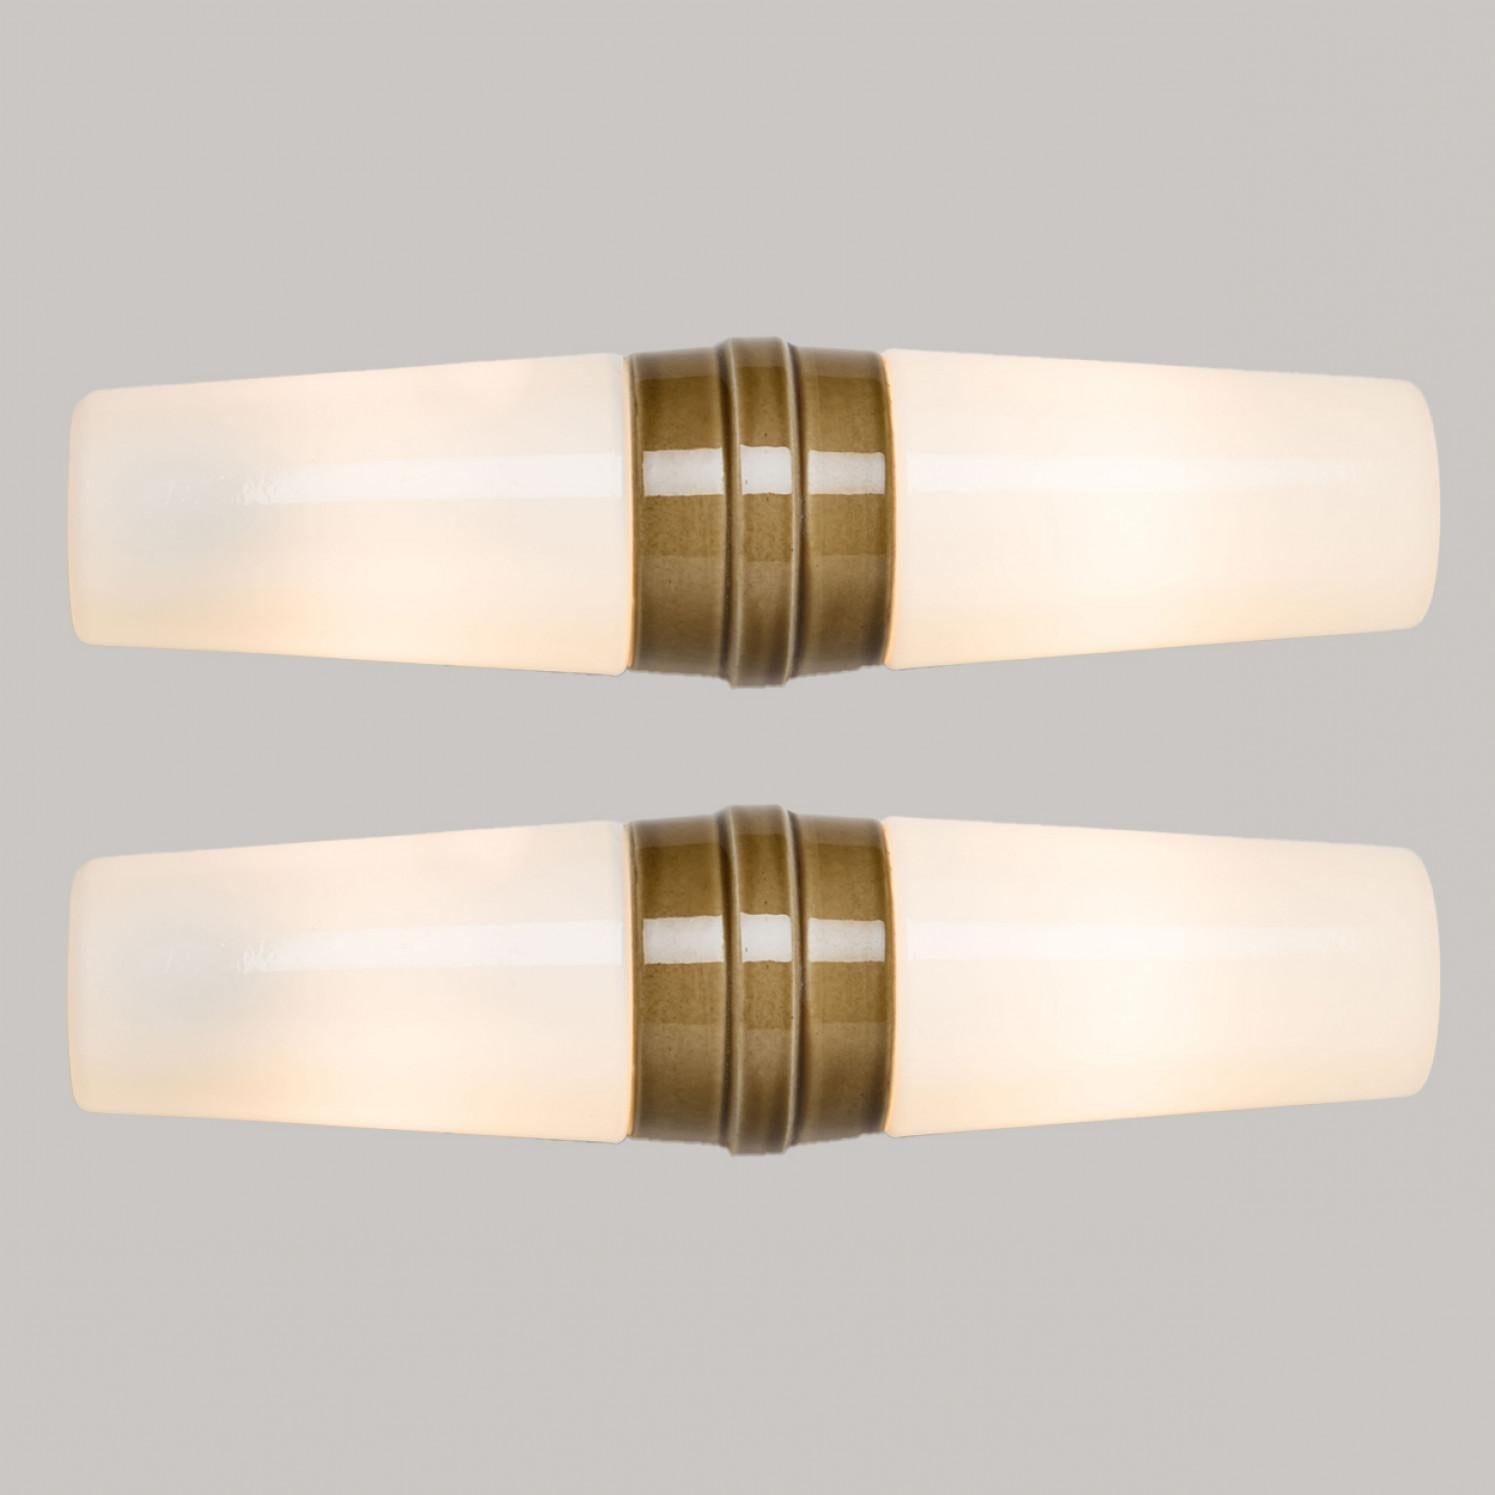 Pair of White and Brown Ceramic Wall Lights, Sweden, 1970 For Sale 6